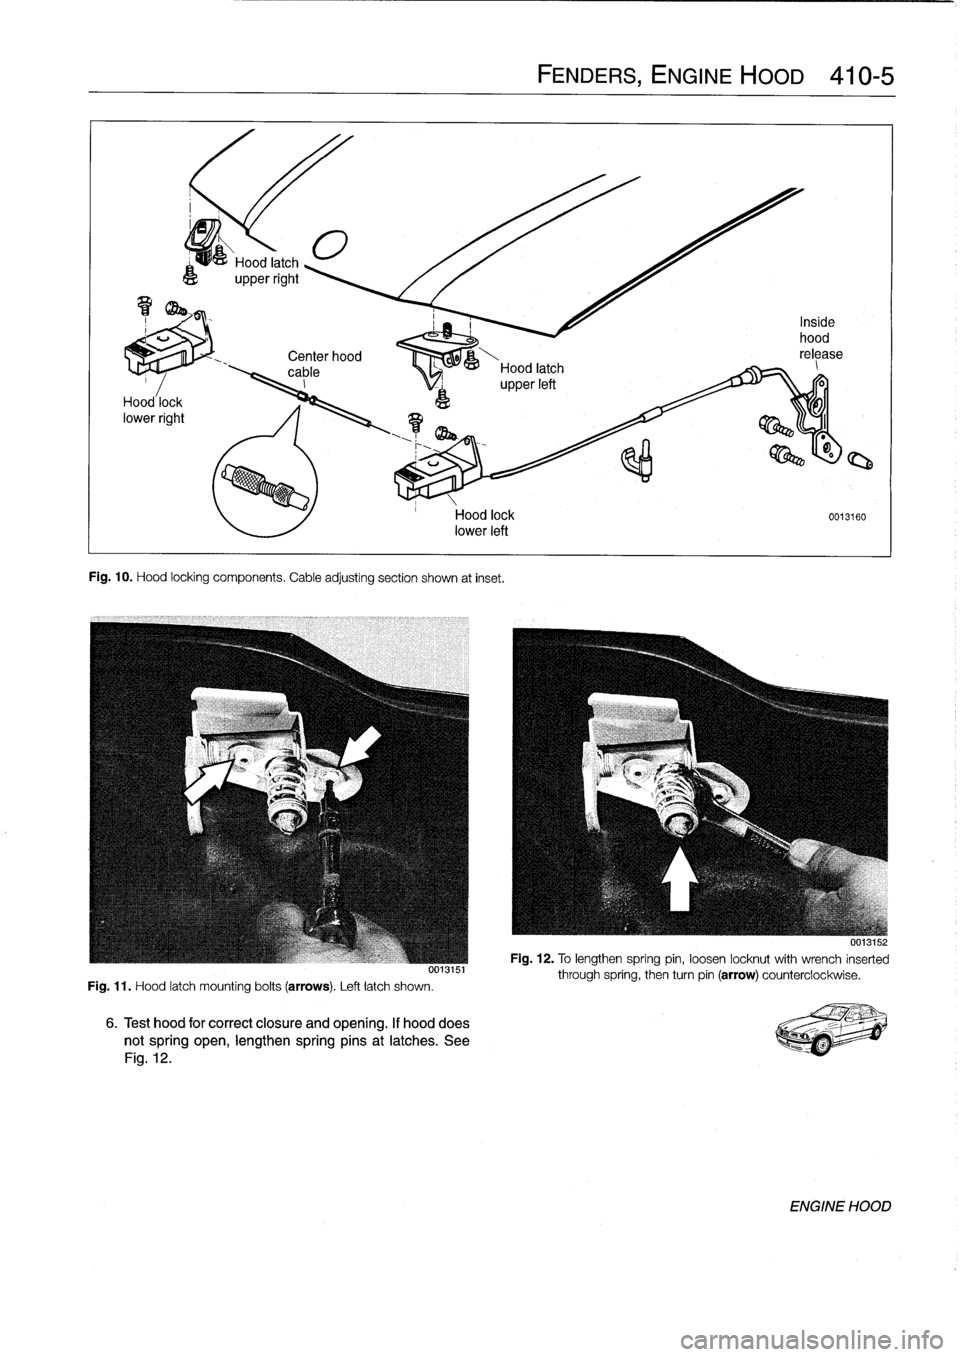 BMW 318i 1997 E36 Workshop Manual 
Center
hood

	

,
00--&---
cable

	

Hood
latch
_
I

	

upperleft

Fig
.
10
.
Hood
locking
components
.
Cable
adjusting
section
shown
at
inset
.

Fig
.
11
.
Hood
latch
mounting
bolts
(arrows)
.
Left
